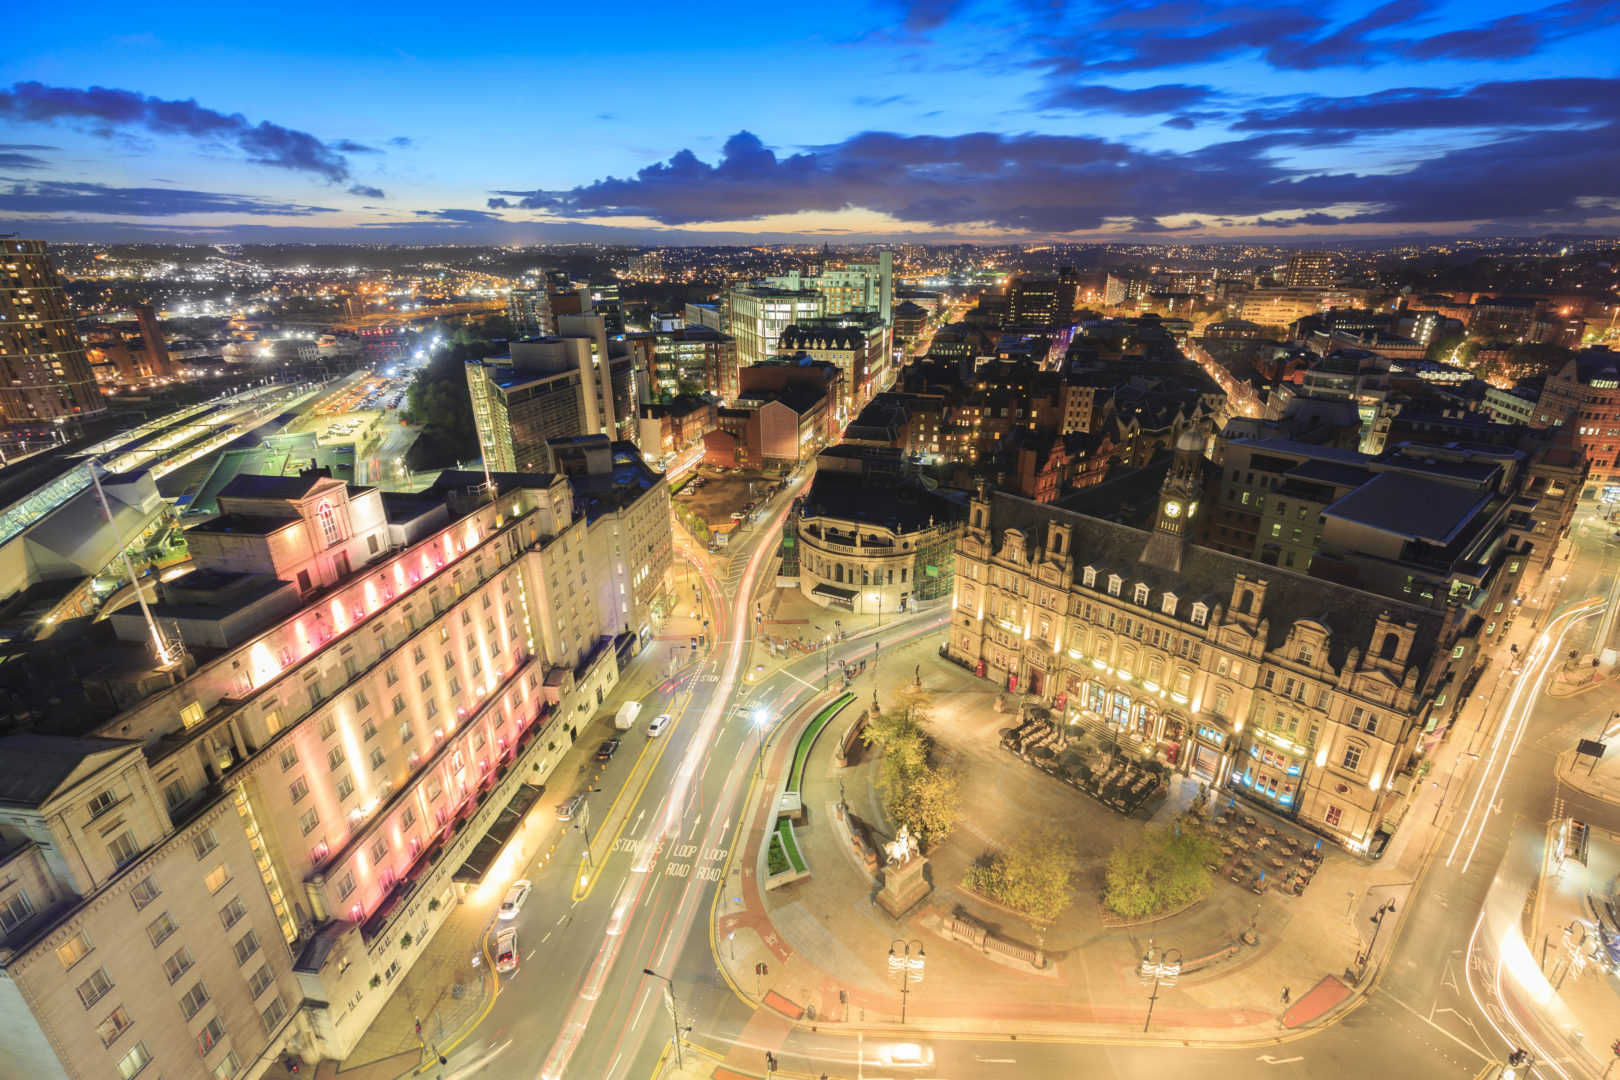 High angle view of hotels, restaurants and bars in the centre of Leeds. Leeds City Square and panoramic night view of skyline.